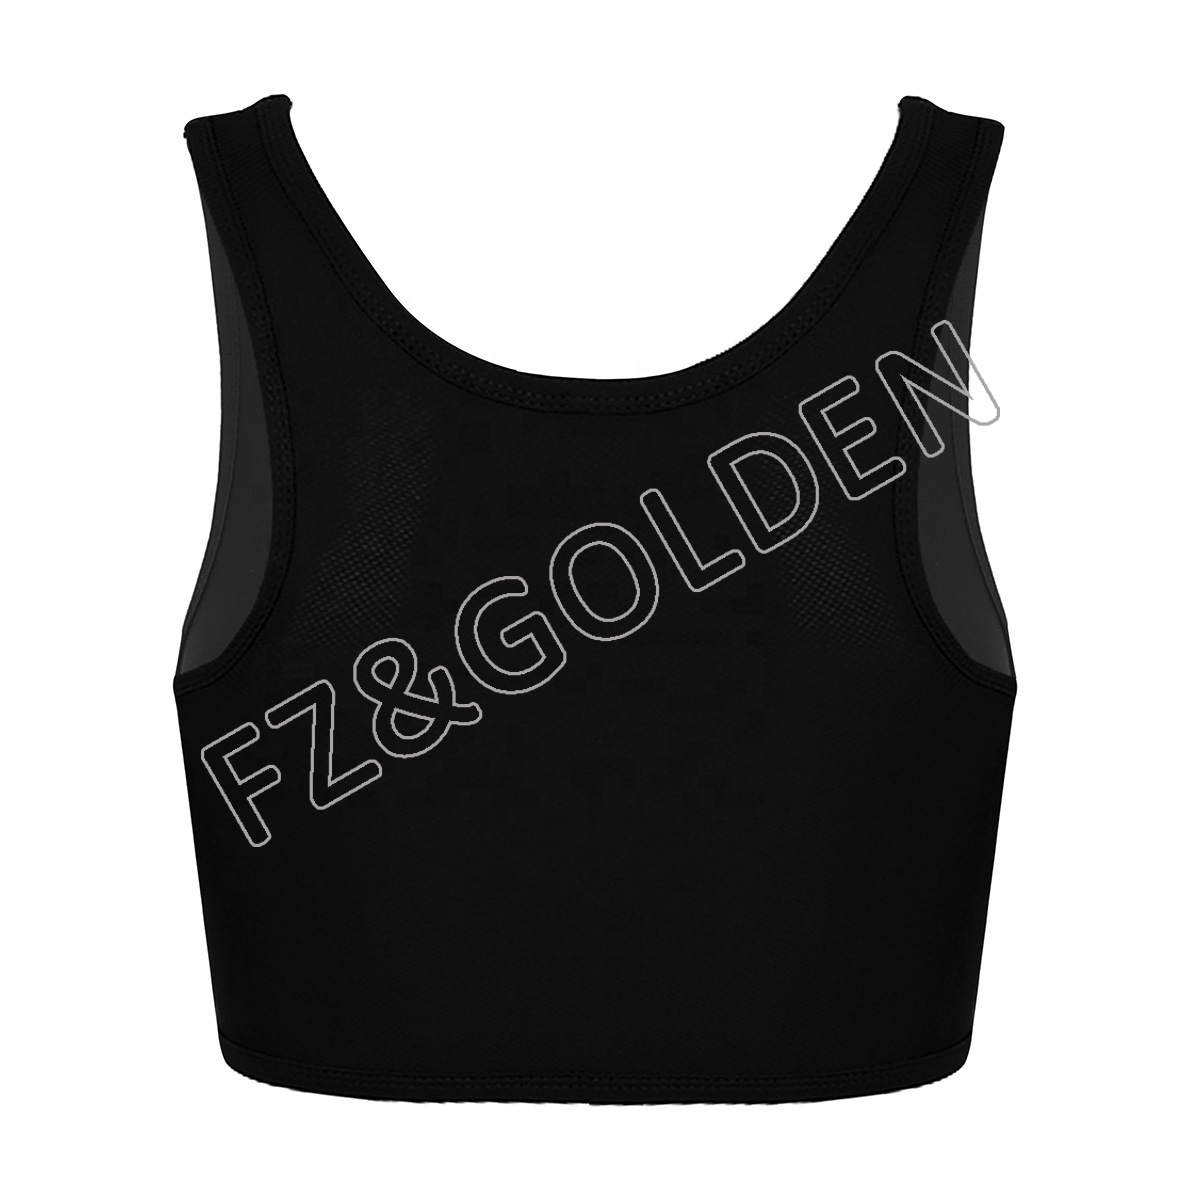 Lesbian Tank Top Tight Chest Breast Tomboy Chest Binder